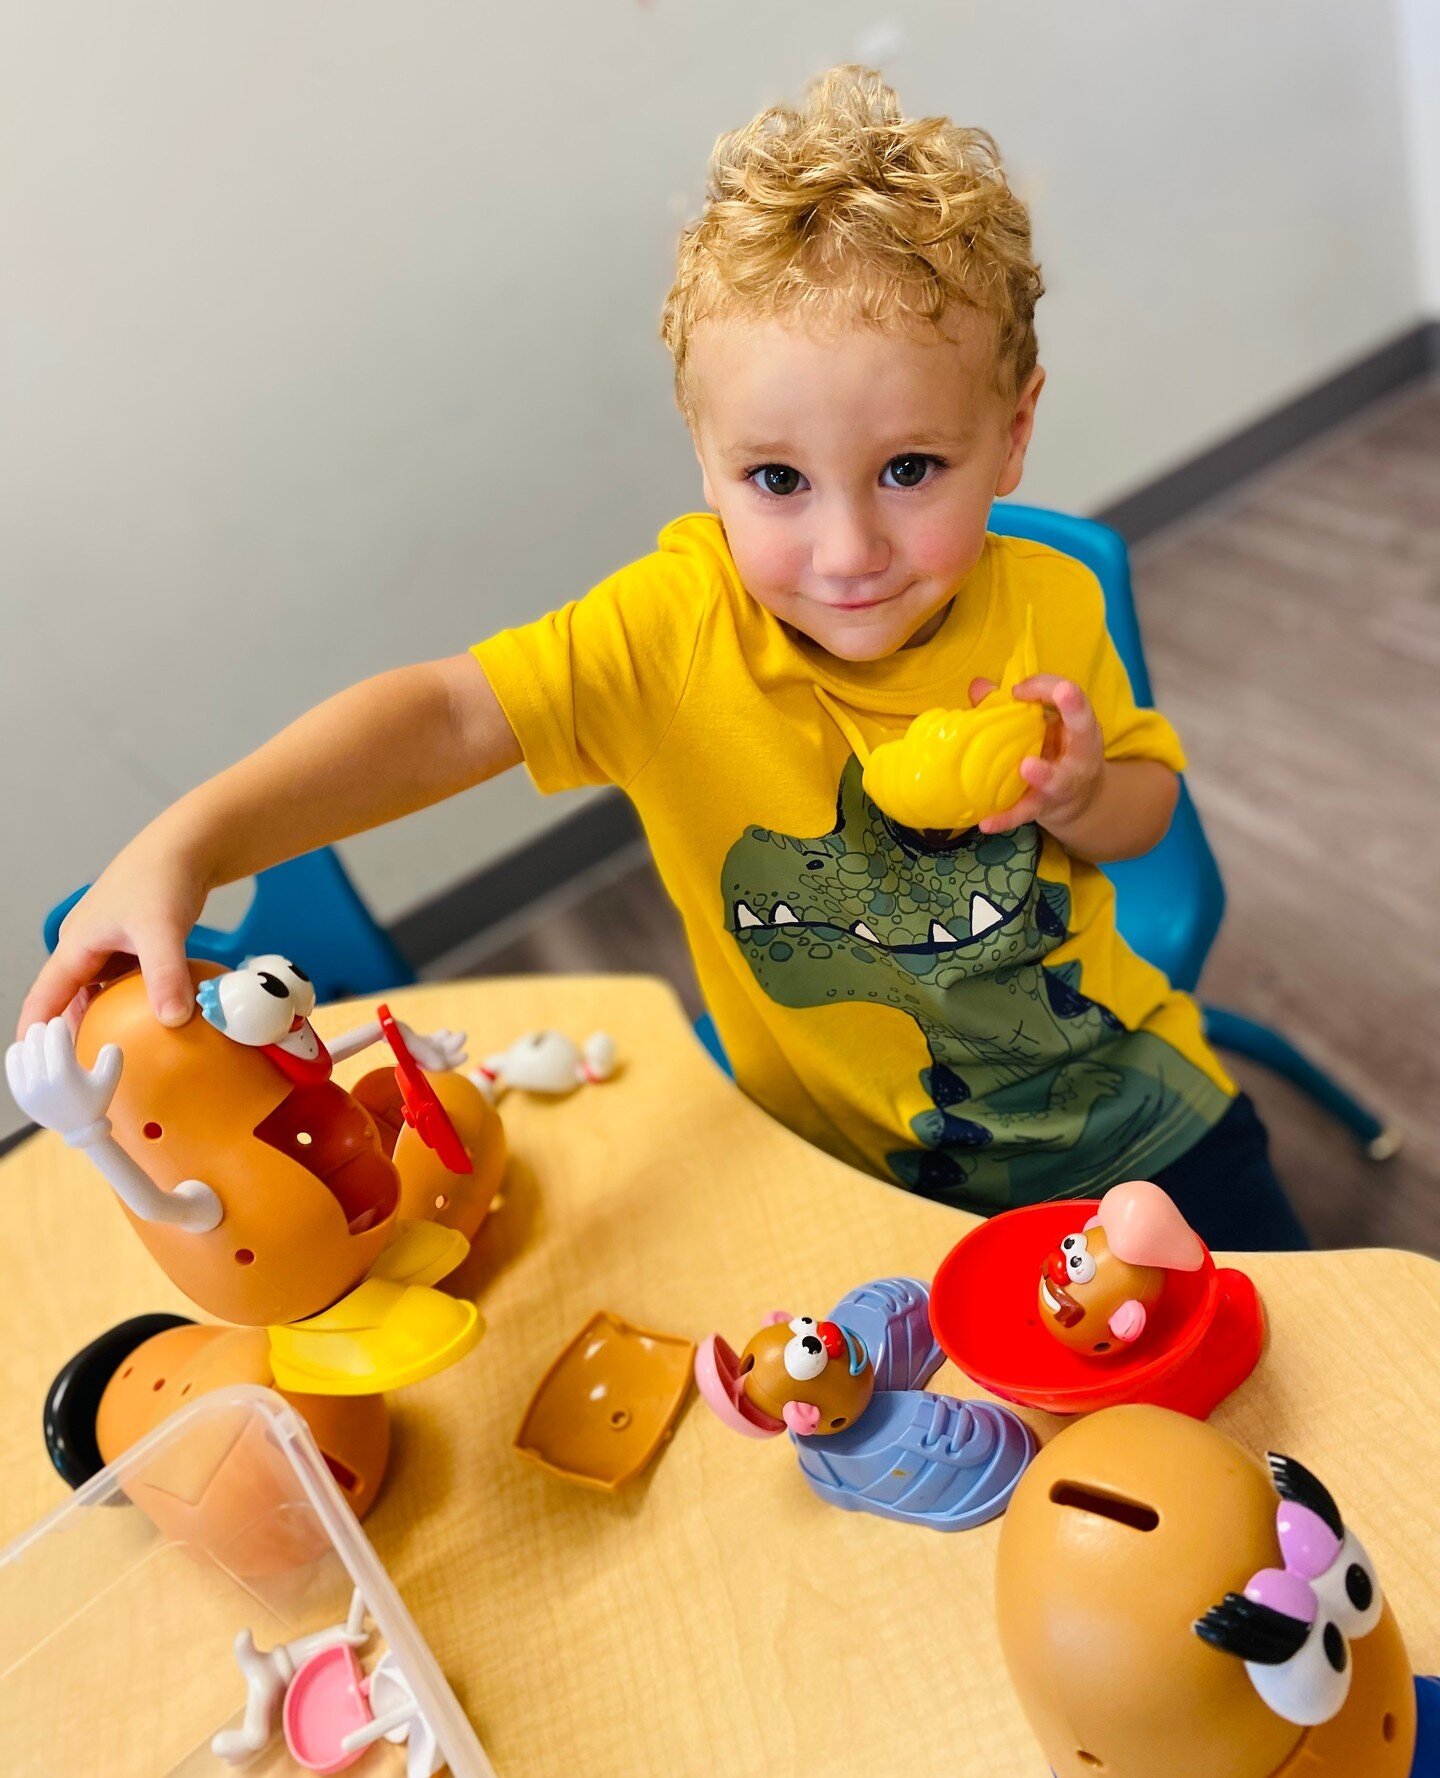 Throwing it back with Mr. Potato head. ⁠
Who remembers playing with these?? 😆🙋&zwj;♂️🙋&zwj;♀️⁠
⁠
#keystonechildcare #gallatintn #earlyeducation #christiandaycare #christianvalues #steamemphasis #gallatindaycare⁠